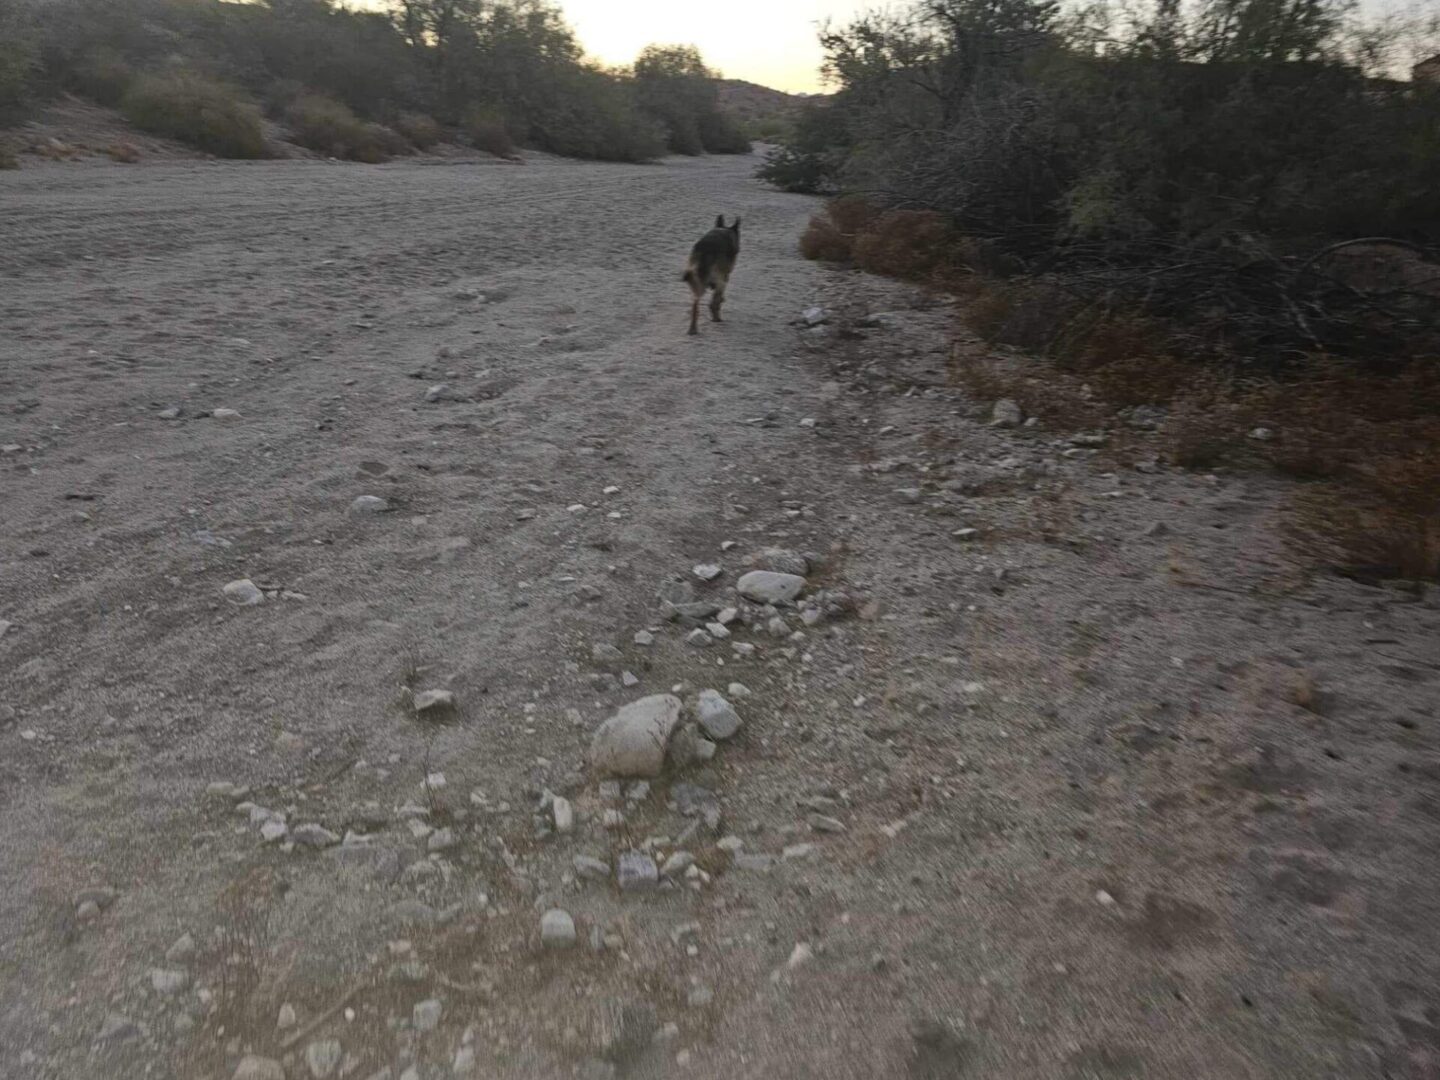 A dog walking on the sand near some bushes